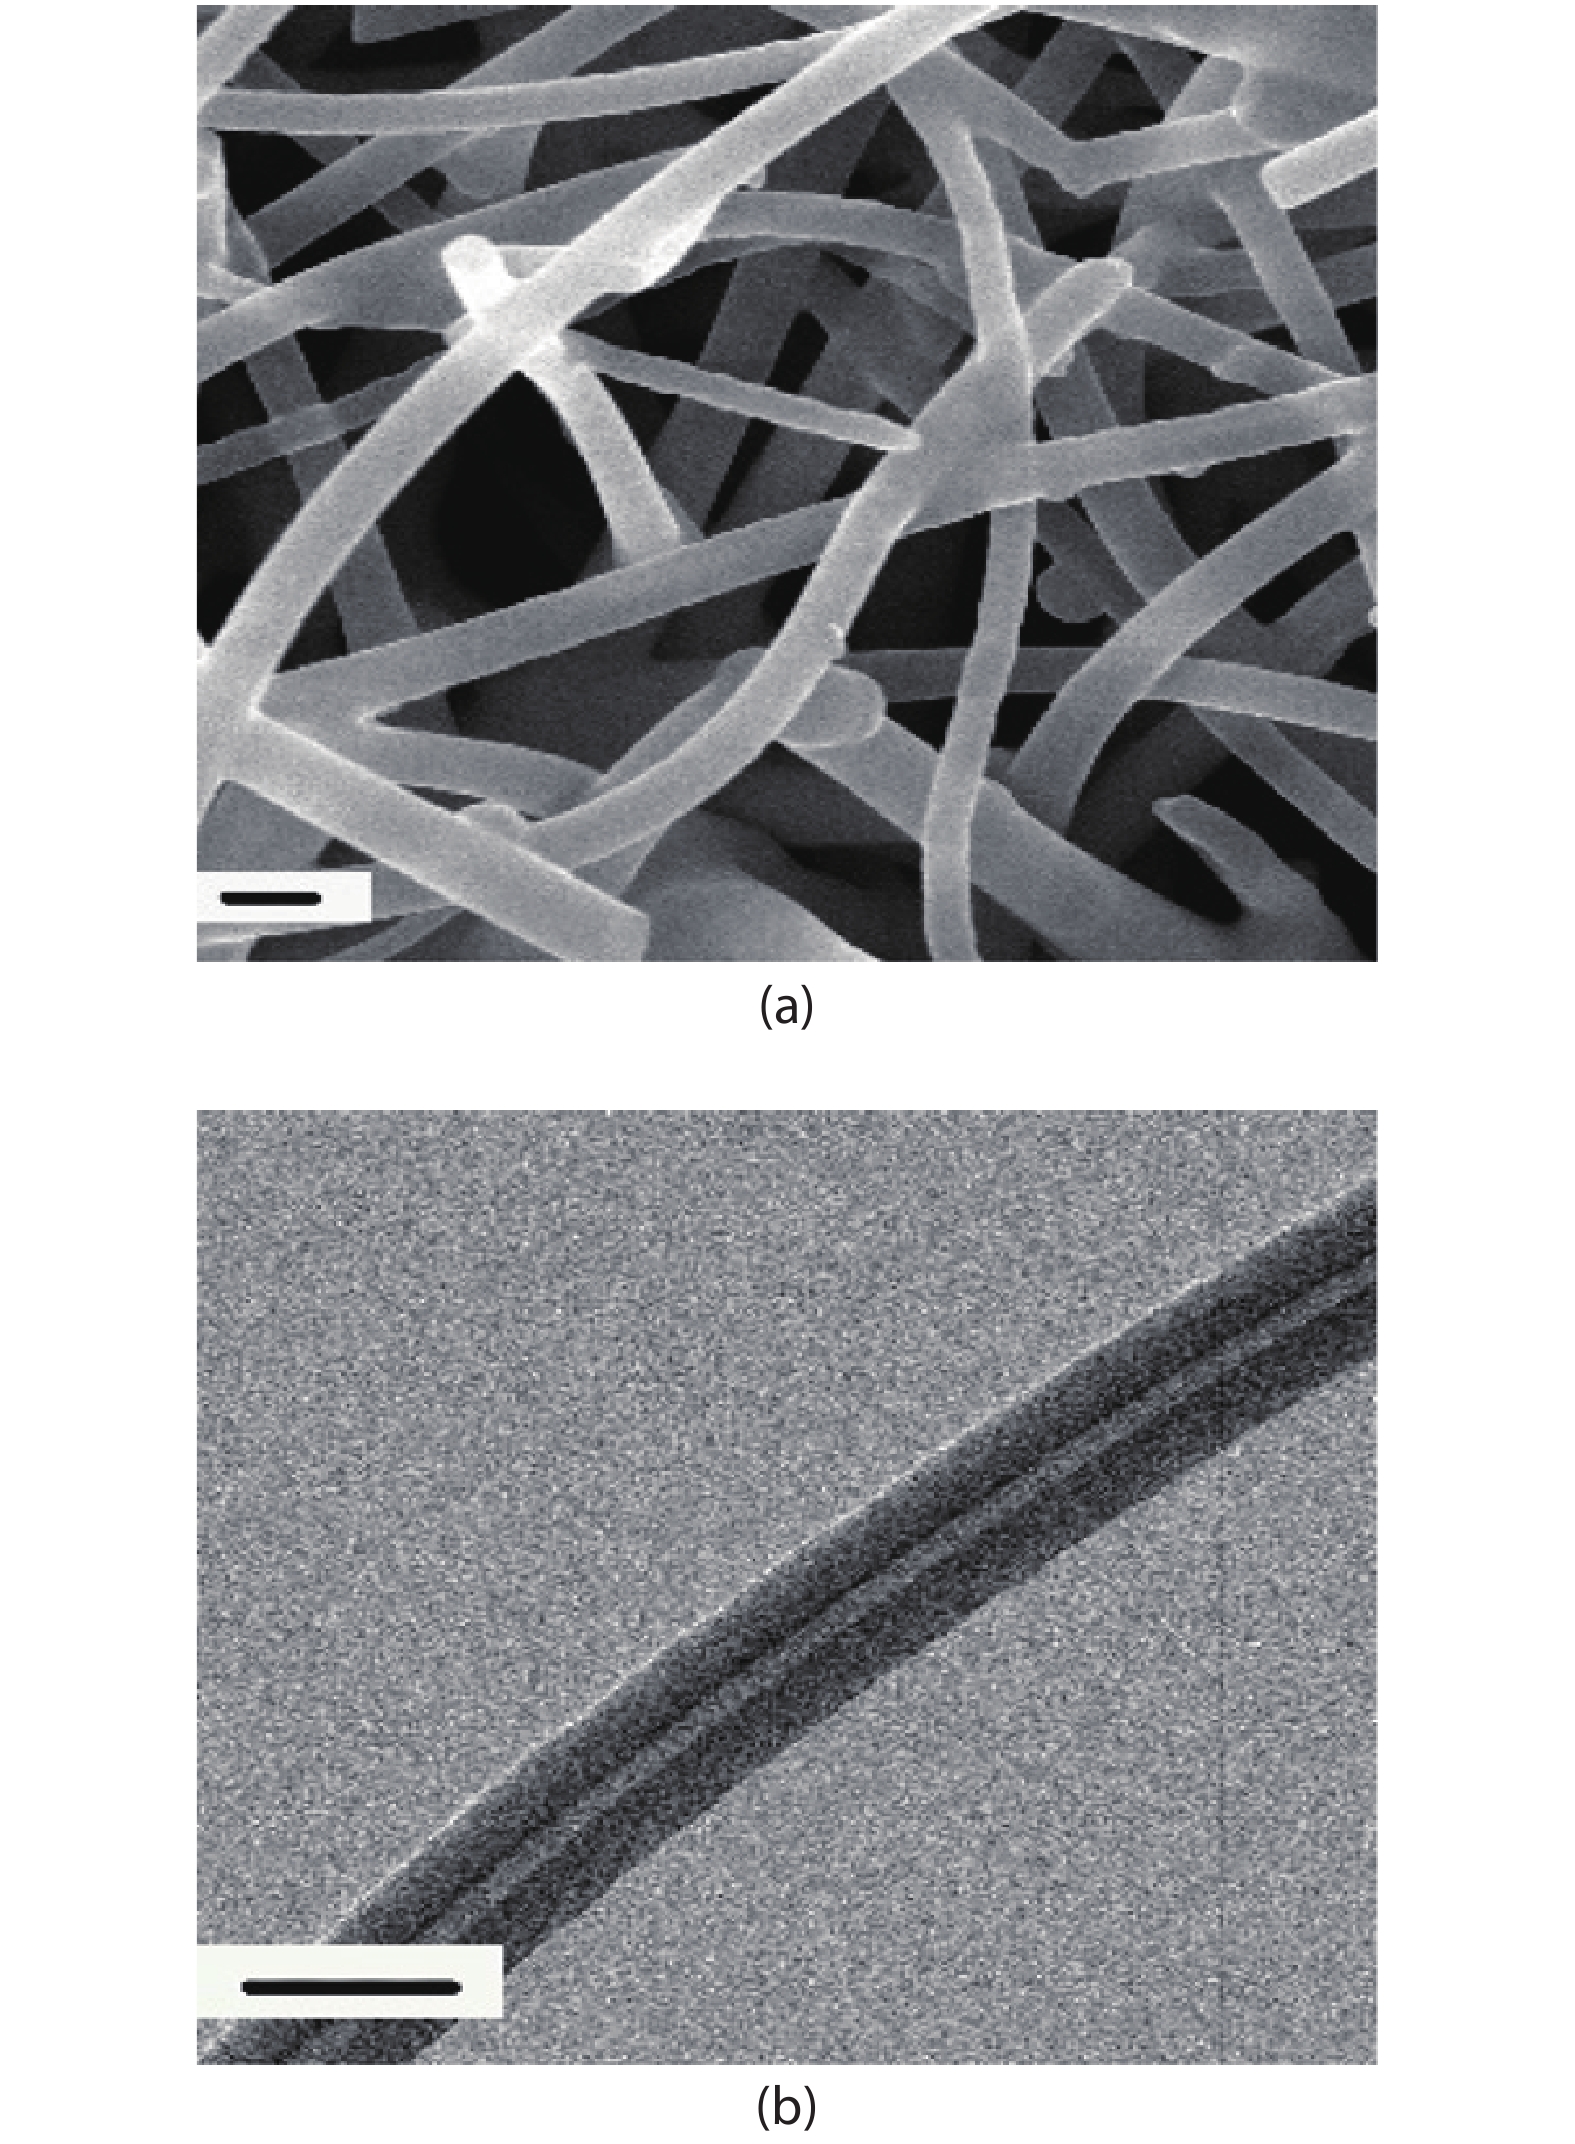 Structure characterization of the CNFs. (a) Image of the CNFs under the SEM. (b) Image of the CNFs under the TEM. (Reproduced with permission from Ref. [15].)